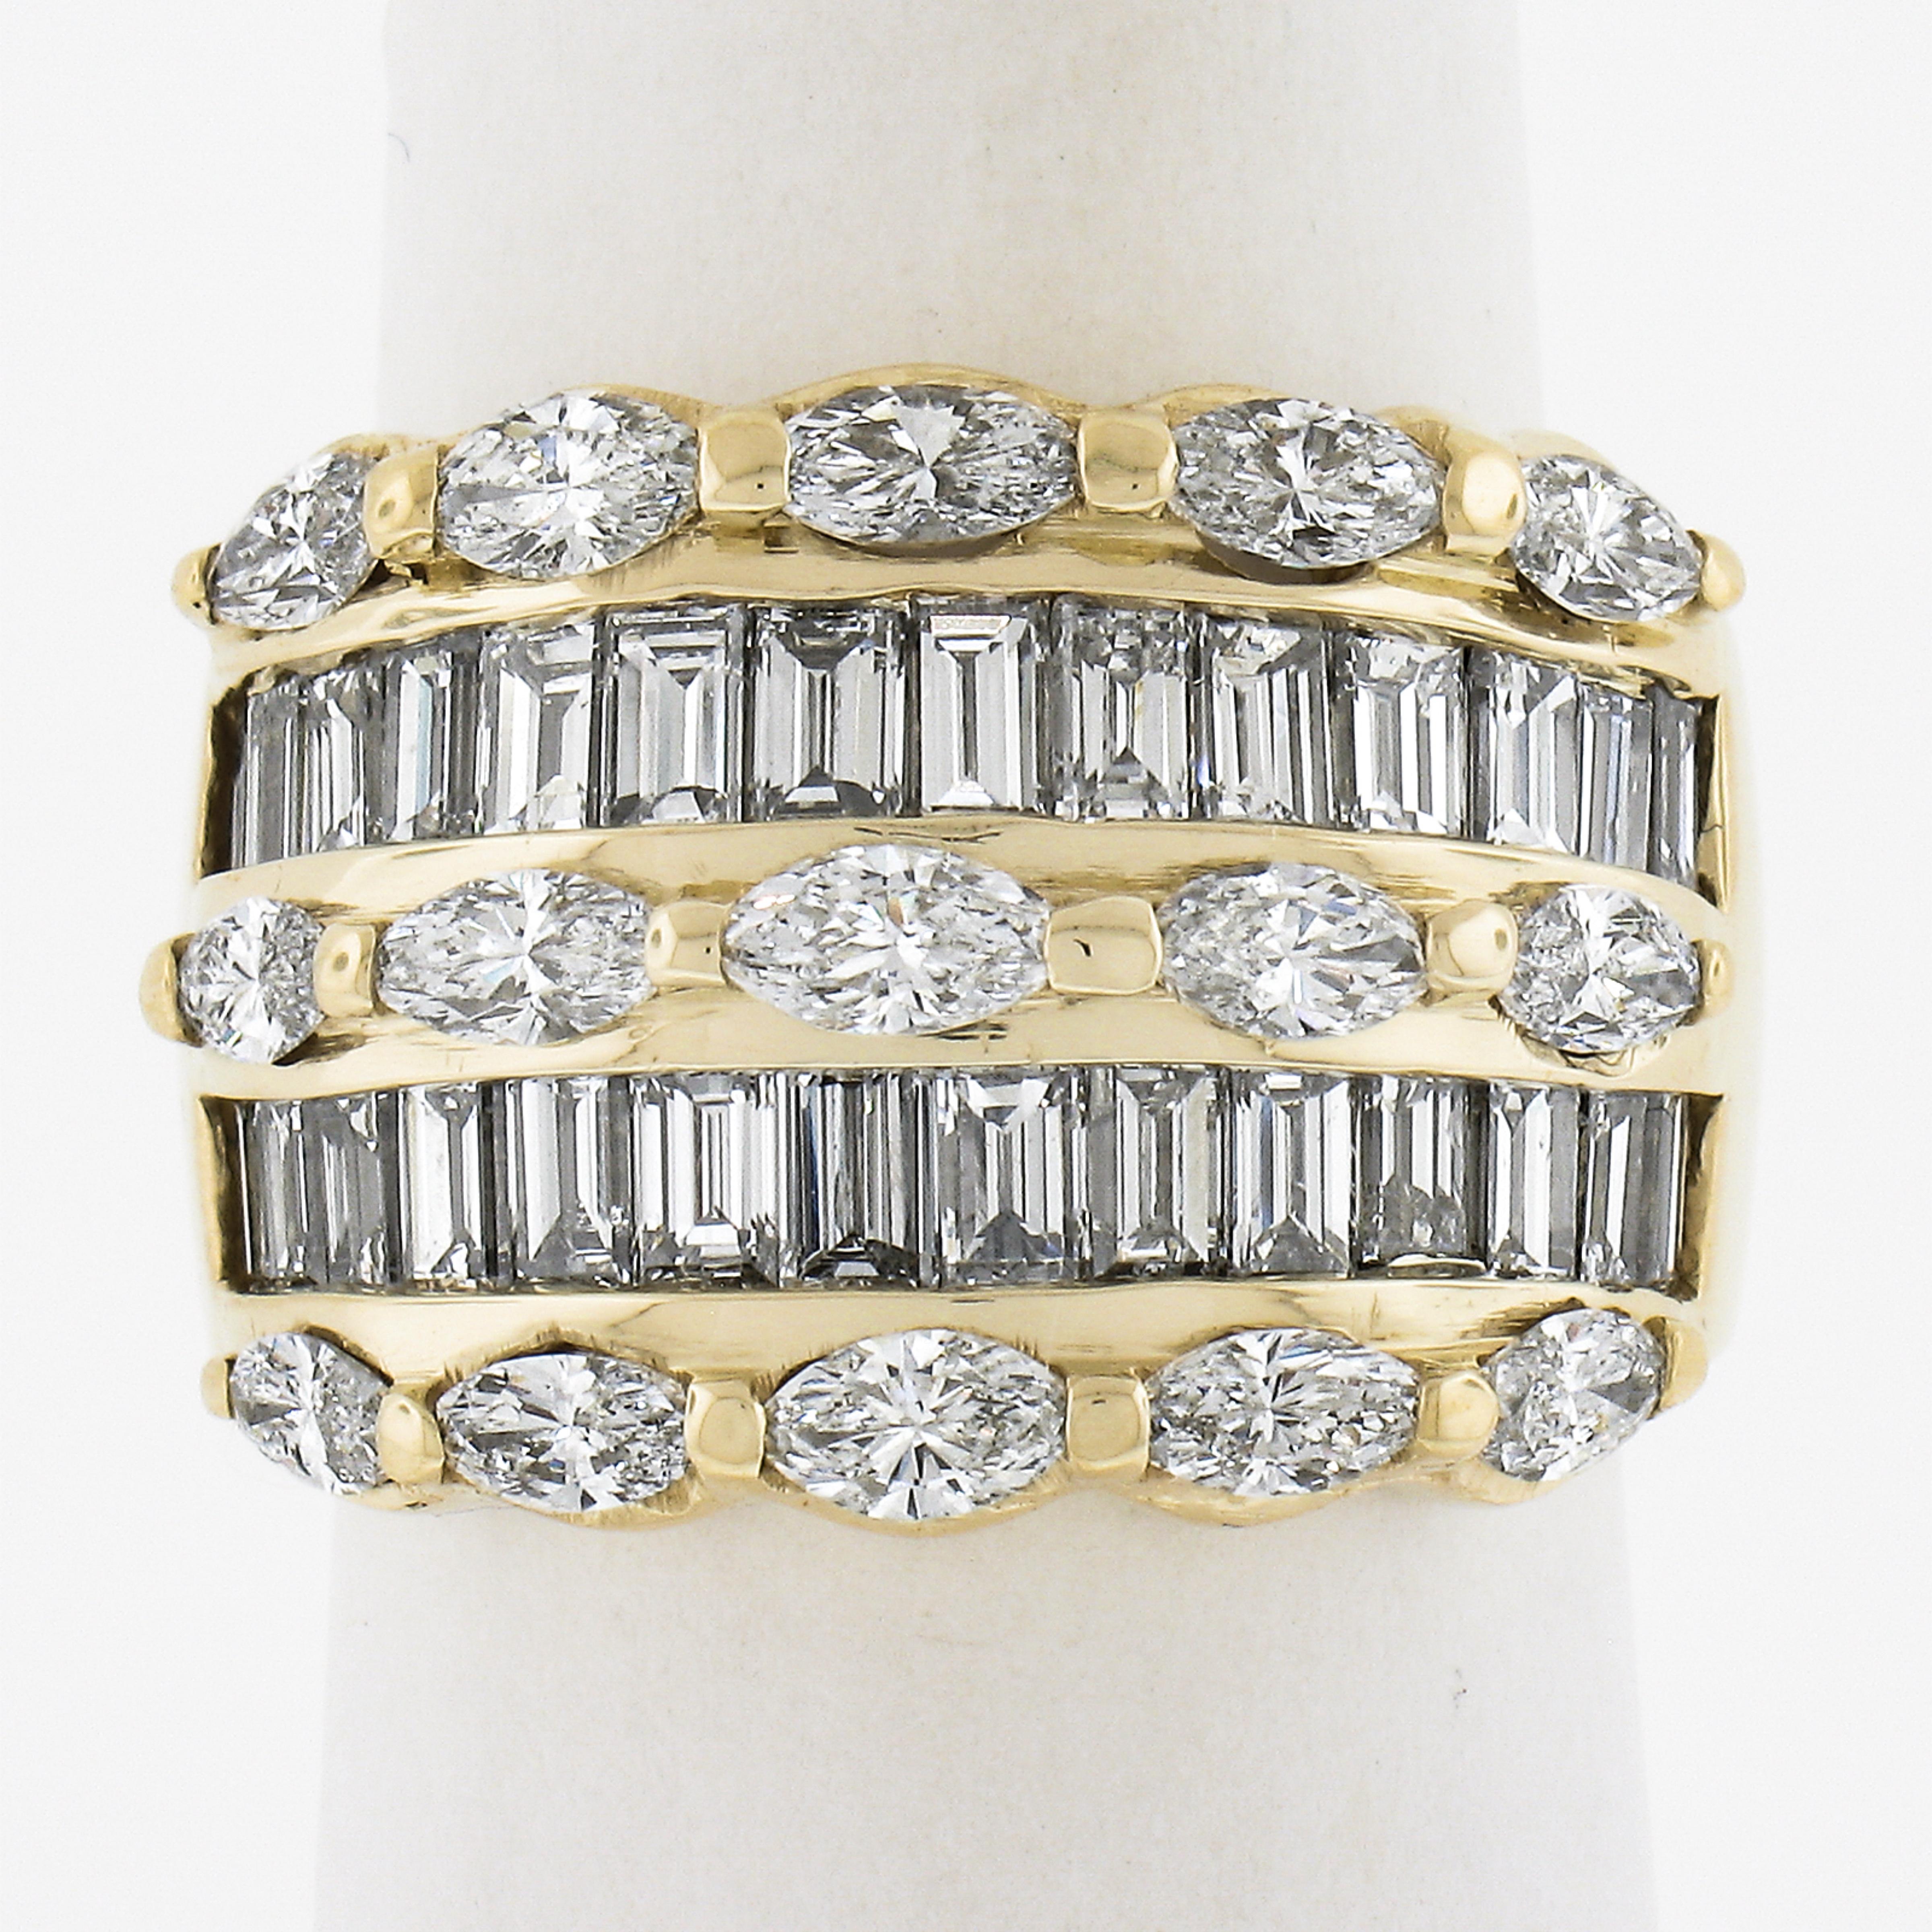 Substantial wide baguette and marquise diamond band/ring. This ring has such a substantial presense on the finger with the low profile baguettes alternating with the higher set marquise diamonds. It is wide enough to be completely noticed but just